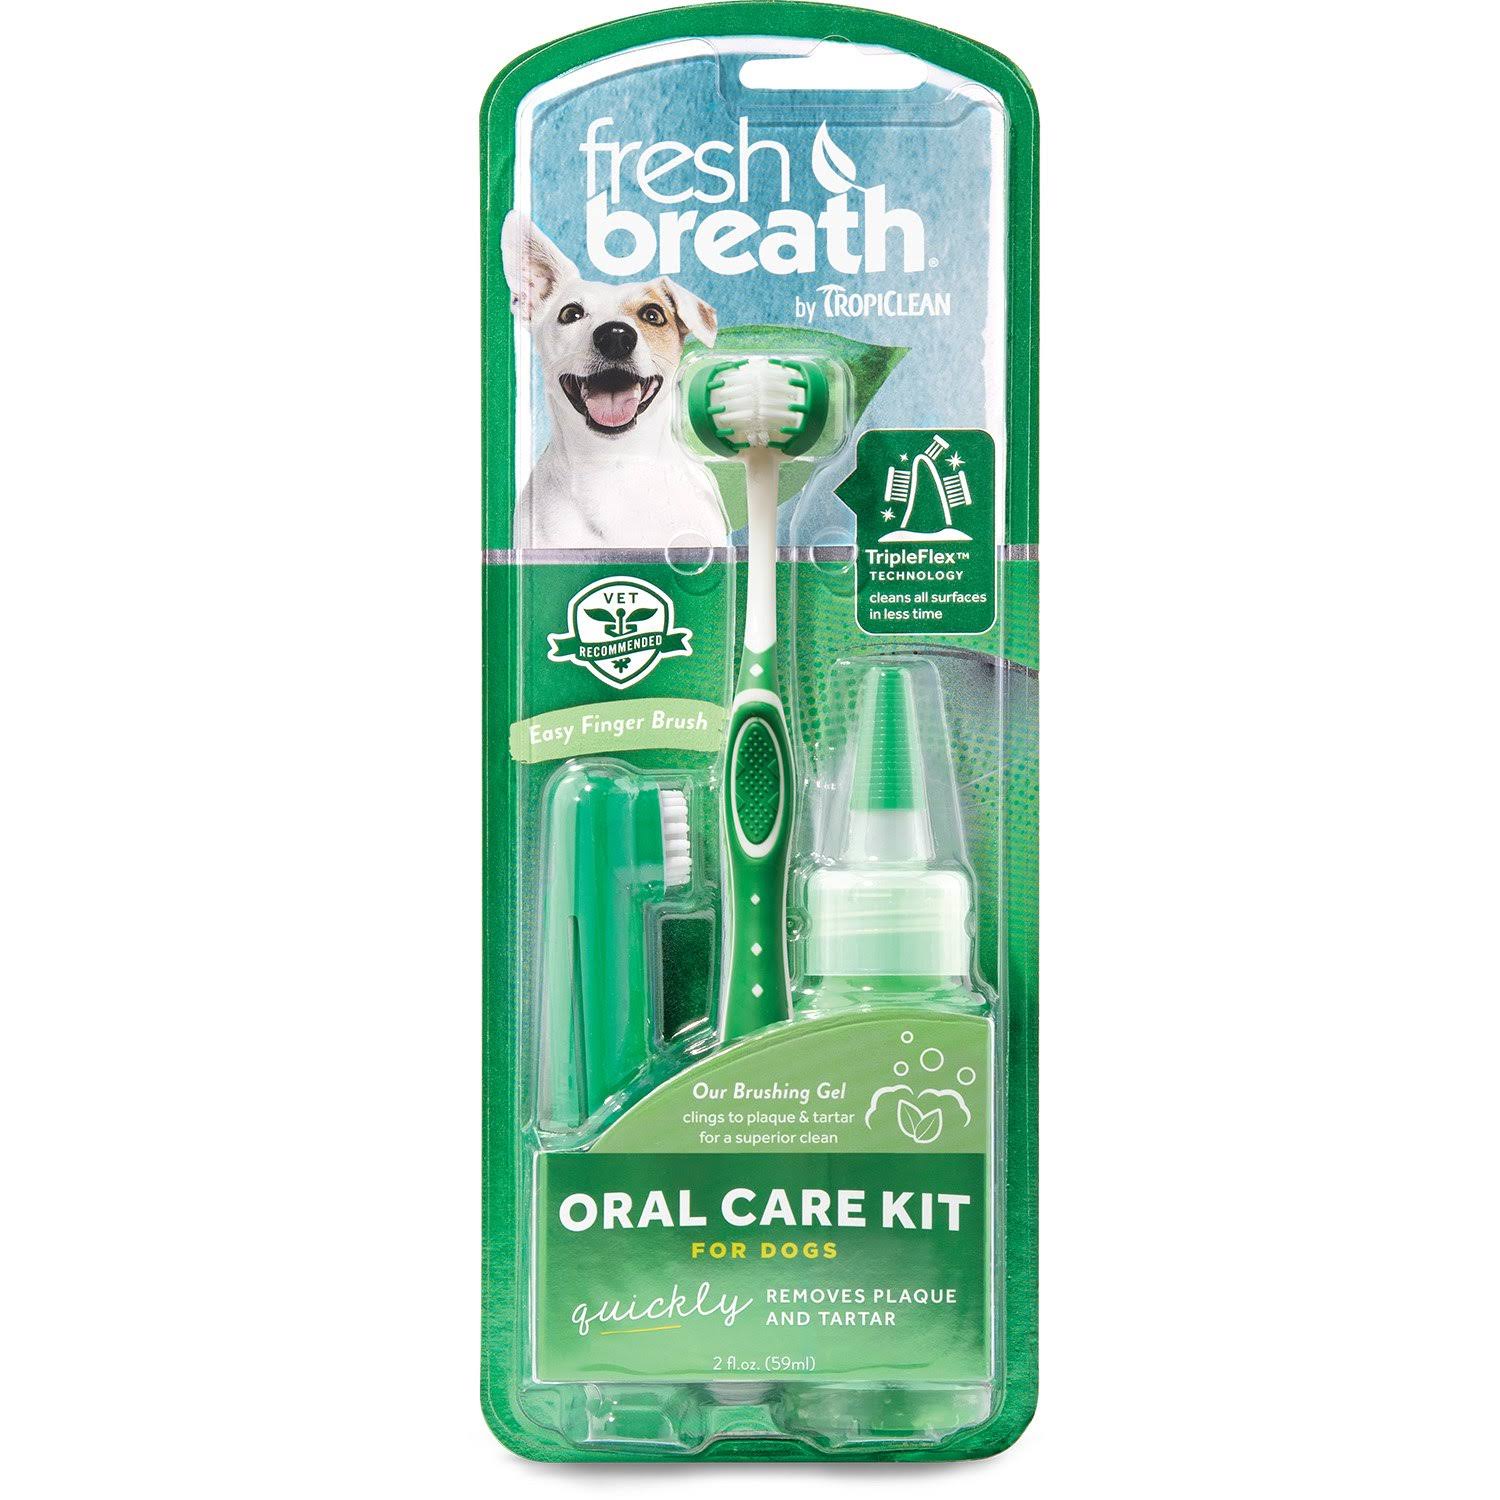 Tropiclean Fresh Breath Pet Oral Care Kit - Plaque Remover, Large